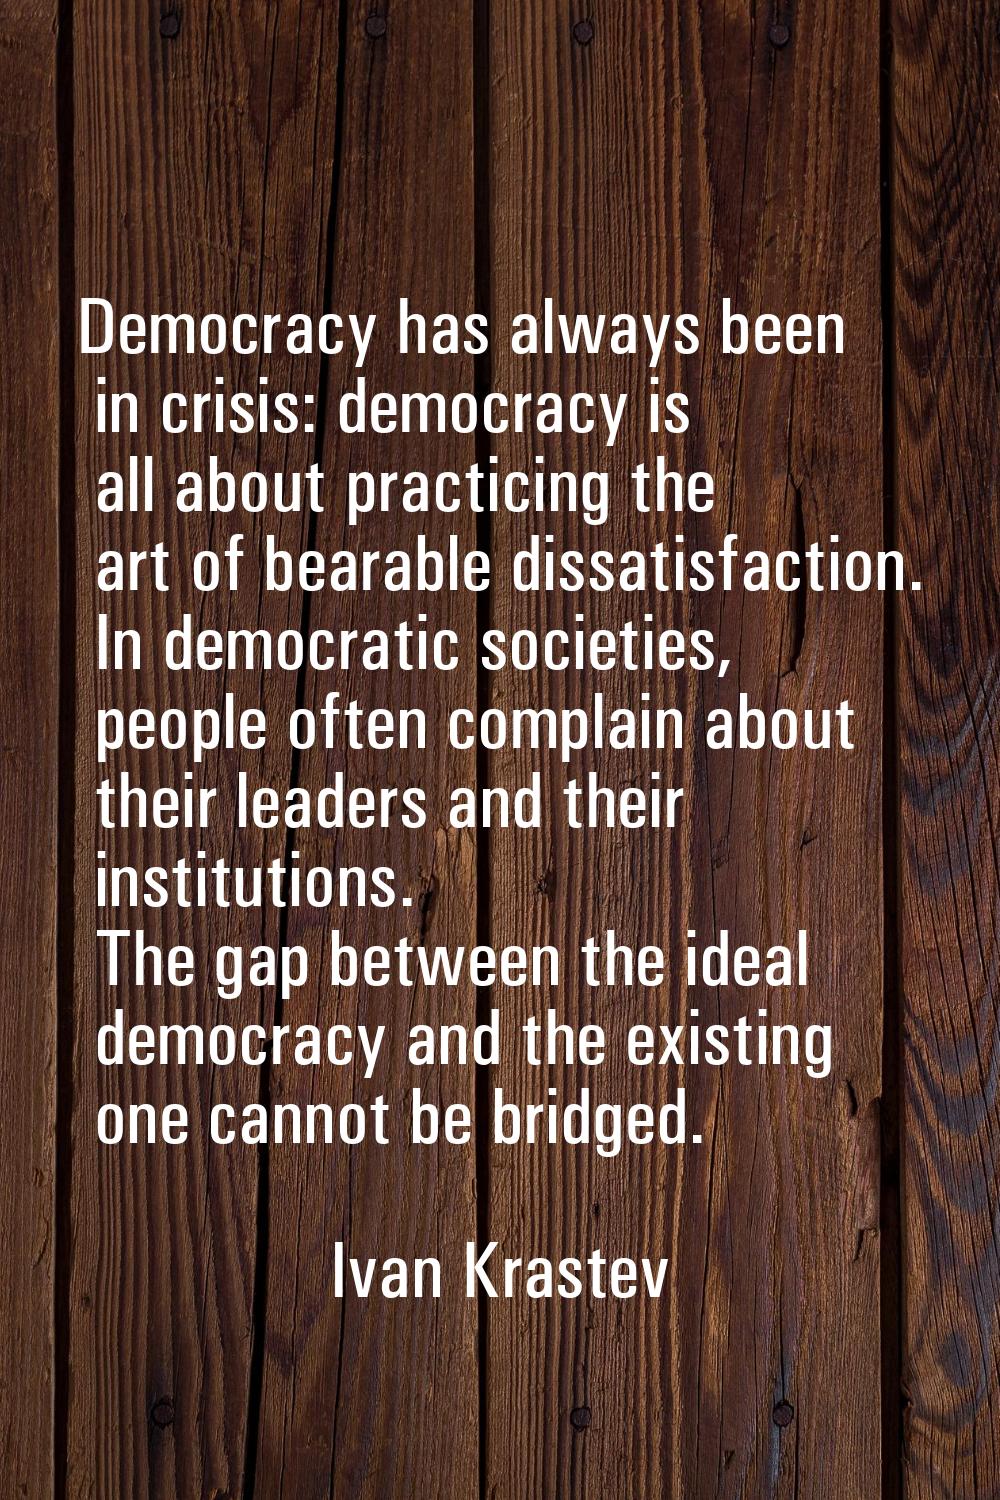 Democracy has always been in crisis: democracy is all about practicing the art of bearable dissatis